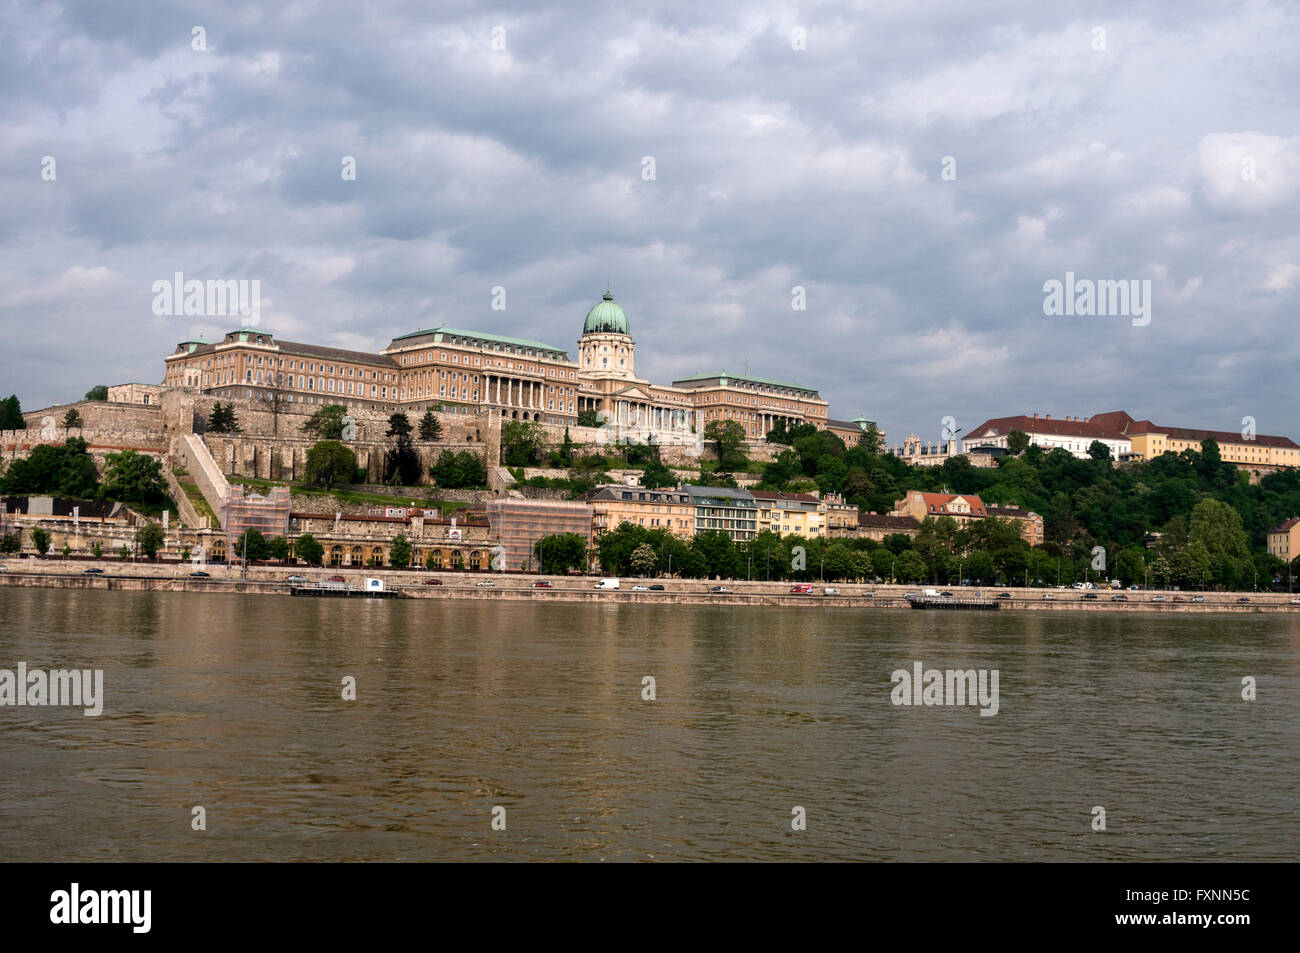 The former Royal Palace on Buda Castle Hill across the River Danube Budapest, Hungary. Buda Castle Hill is a designated UNESCO W Stock Photo